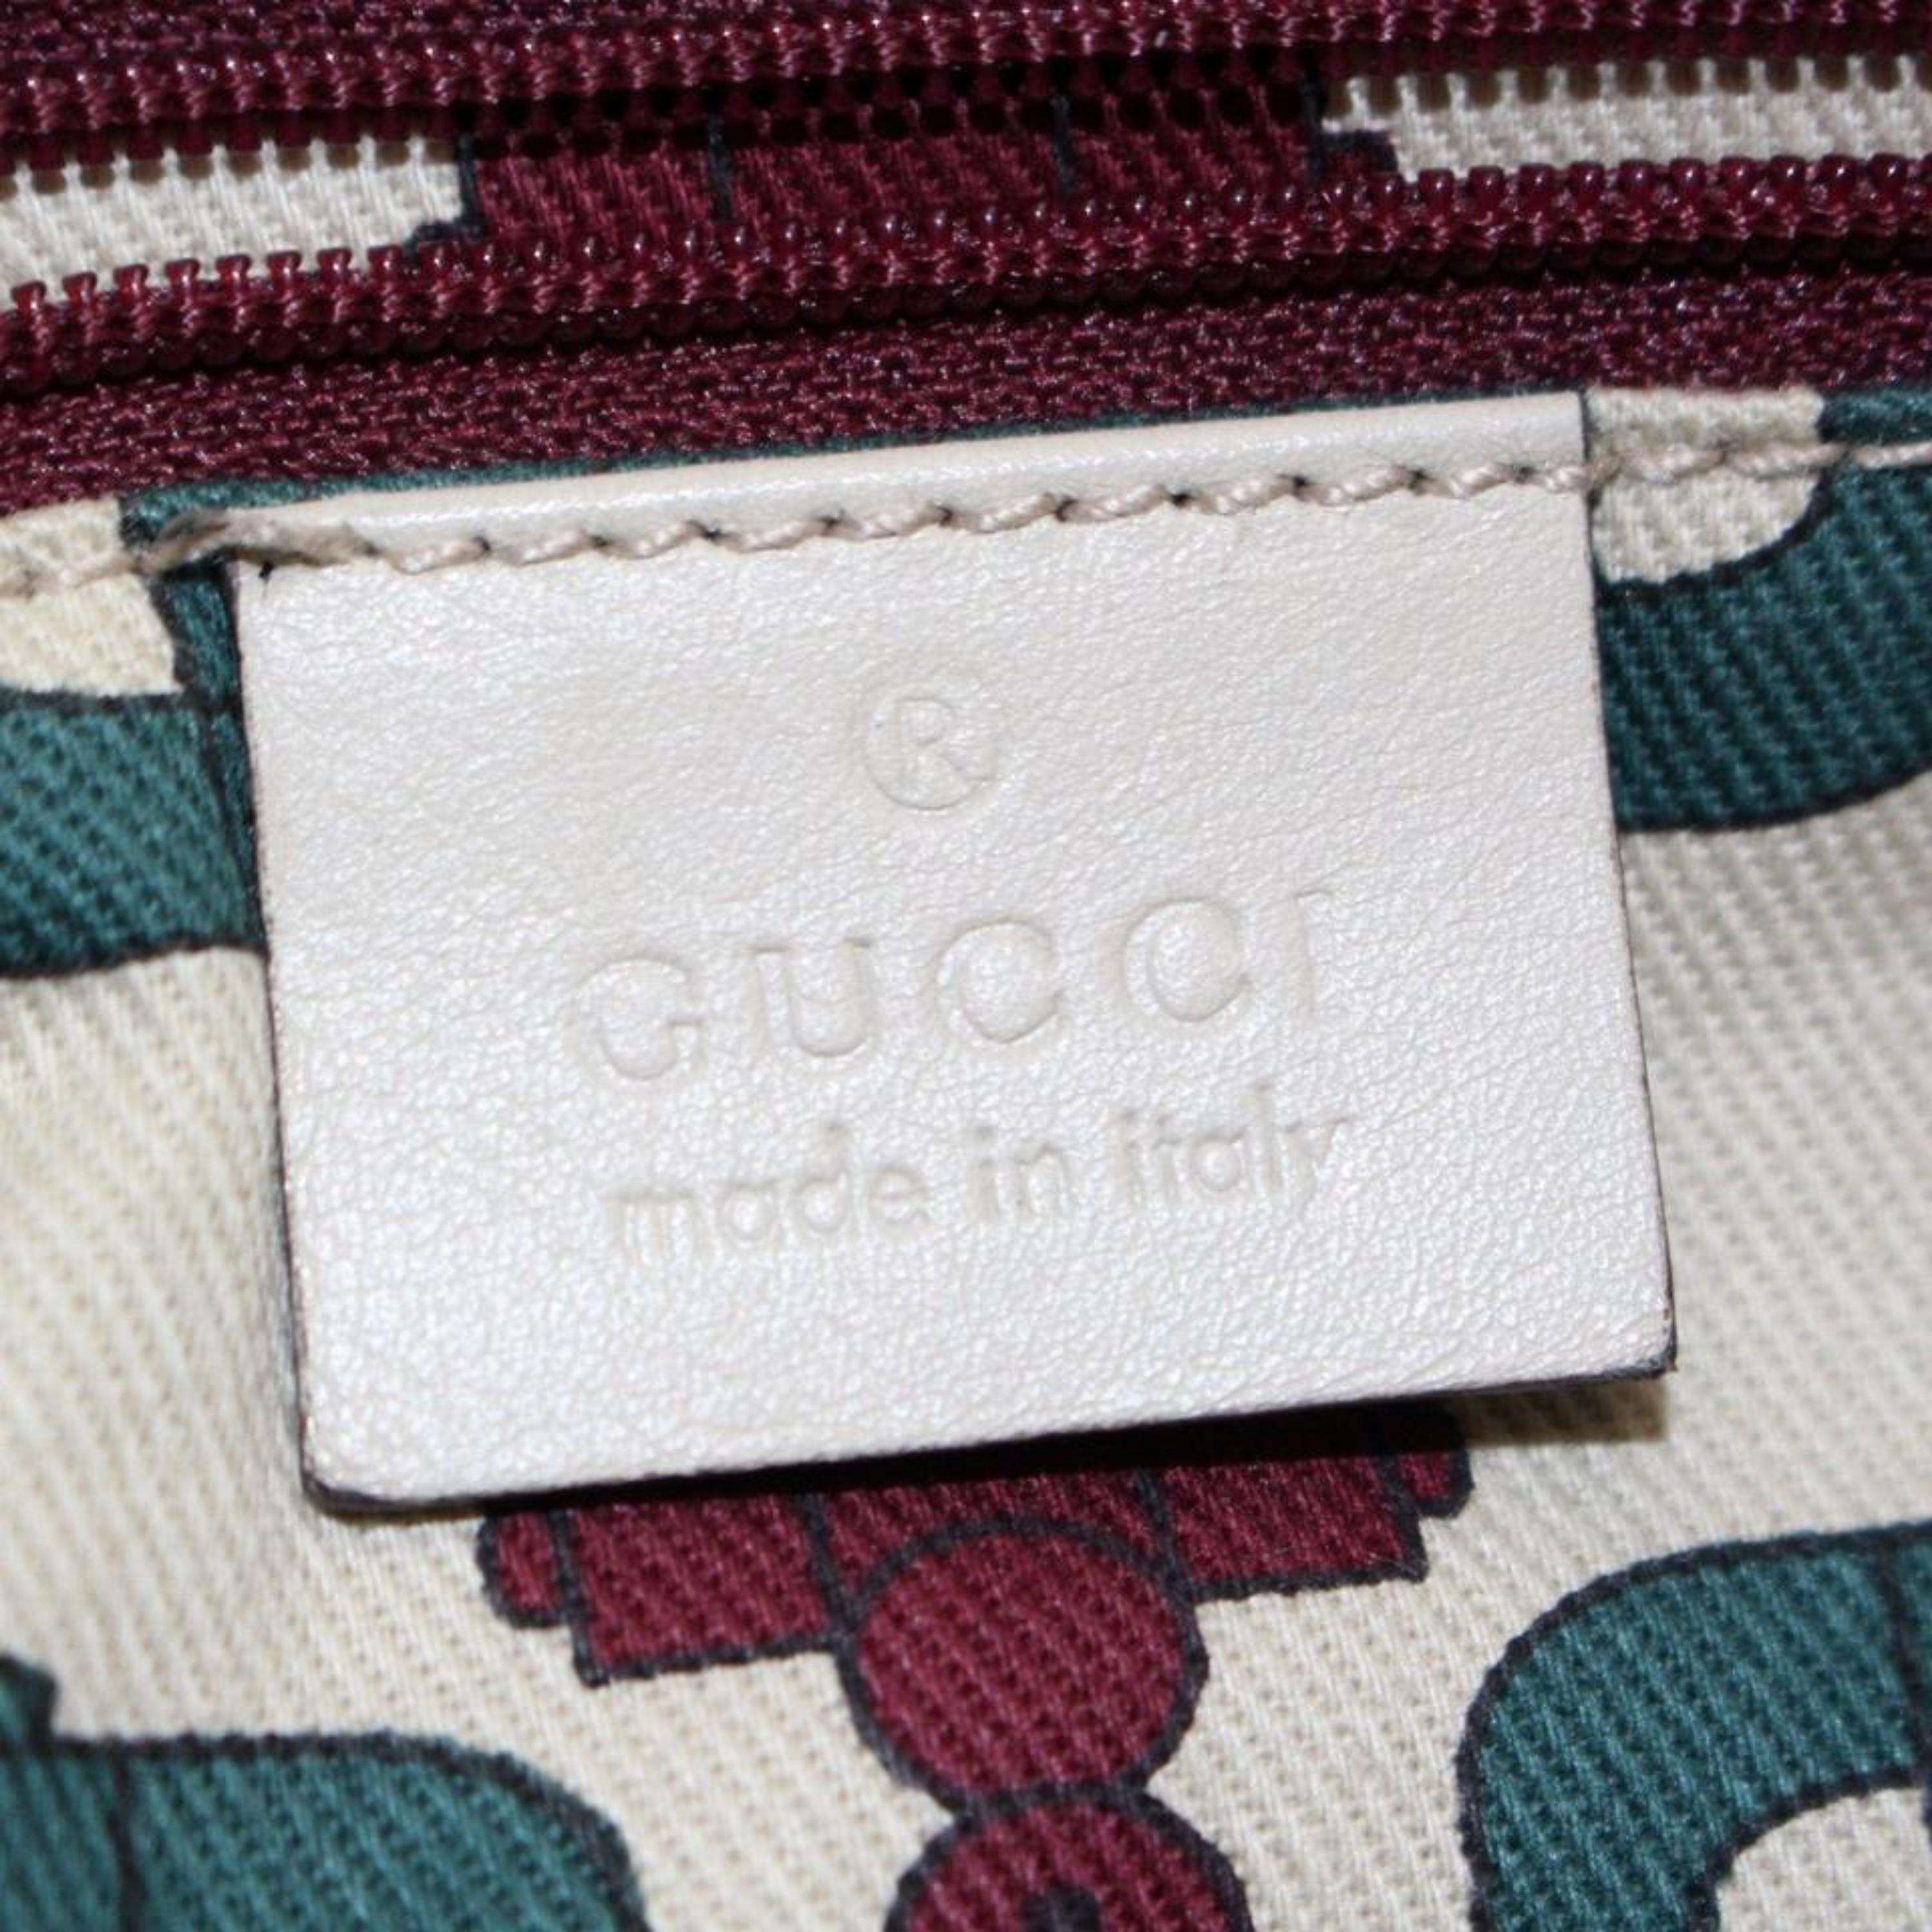 Gucci Ivory Guccissima D Ring Hobo 868308 Cream Leather Shoulder Bag In Good Condition For Sale In Forest Hills, NY